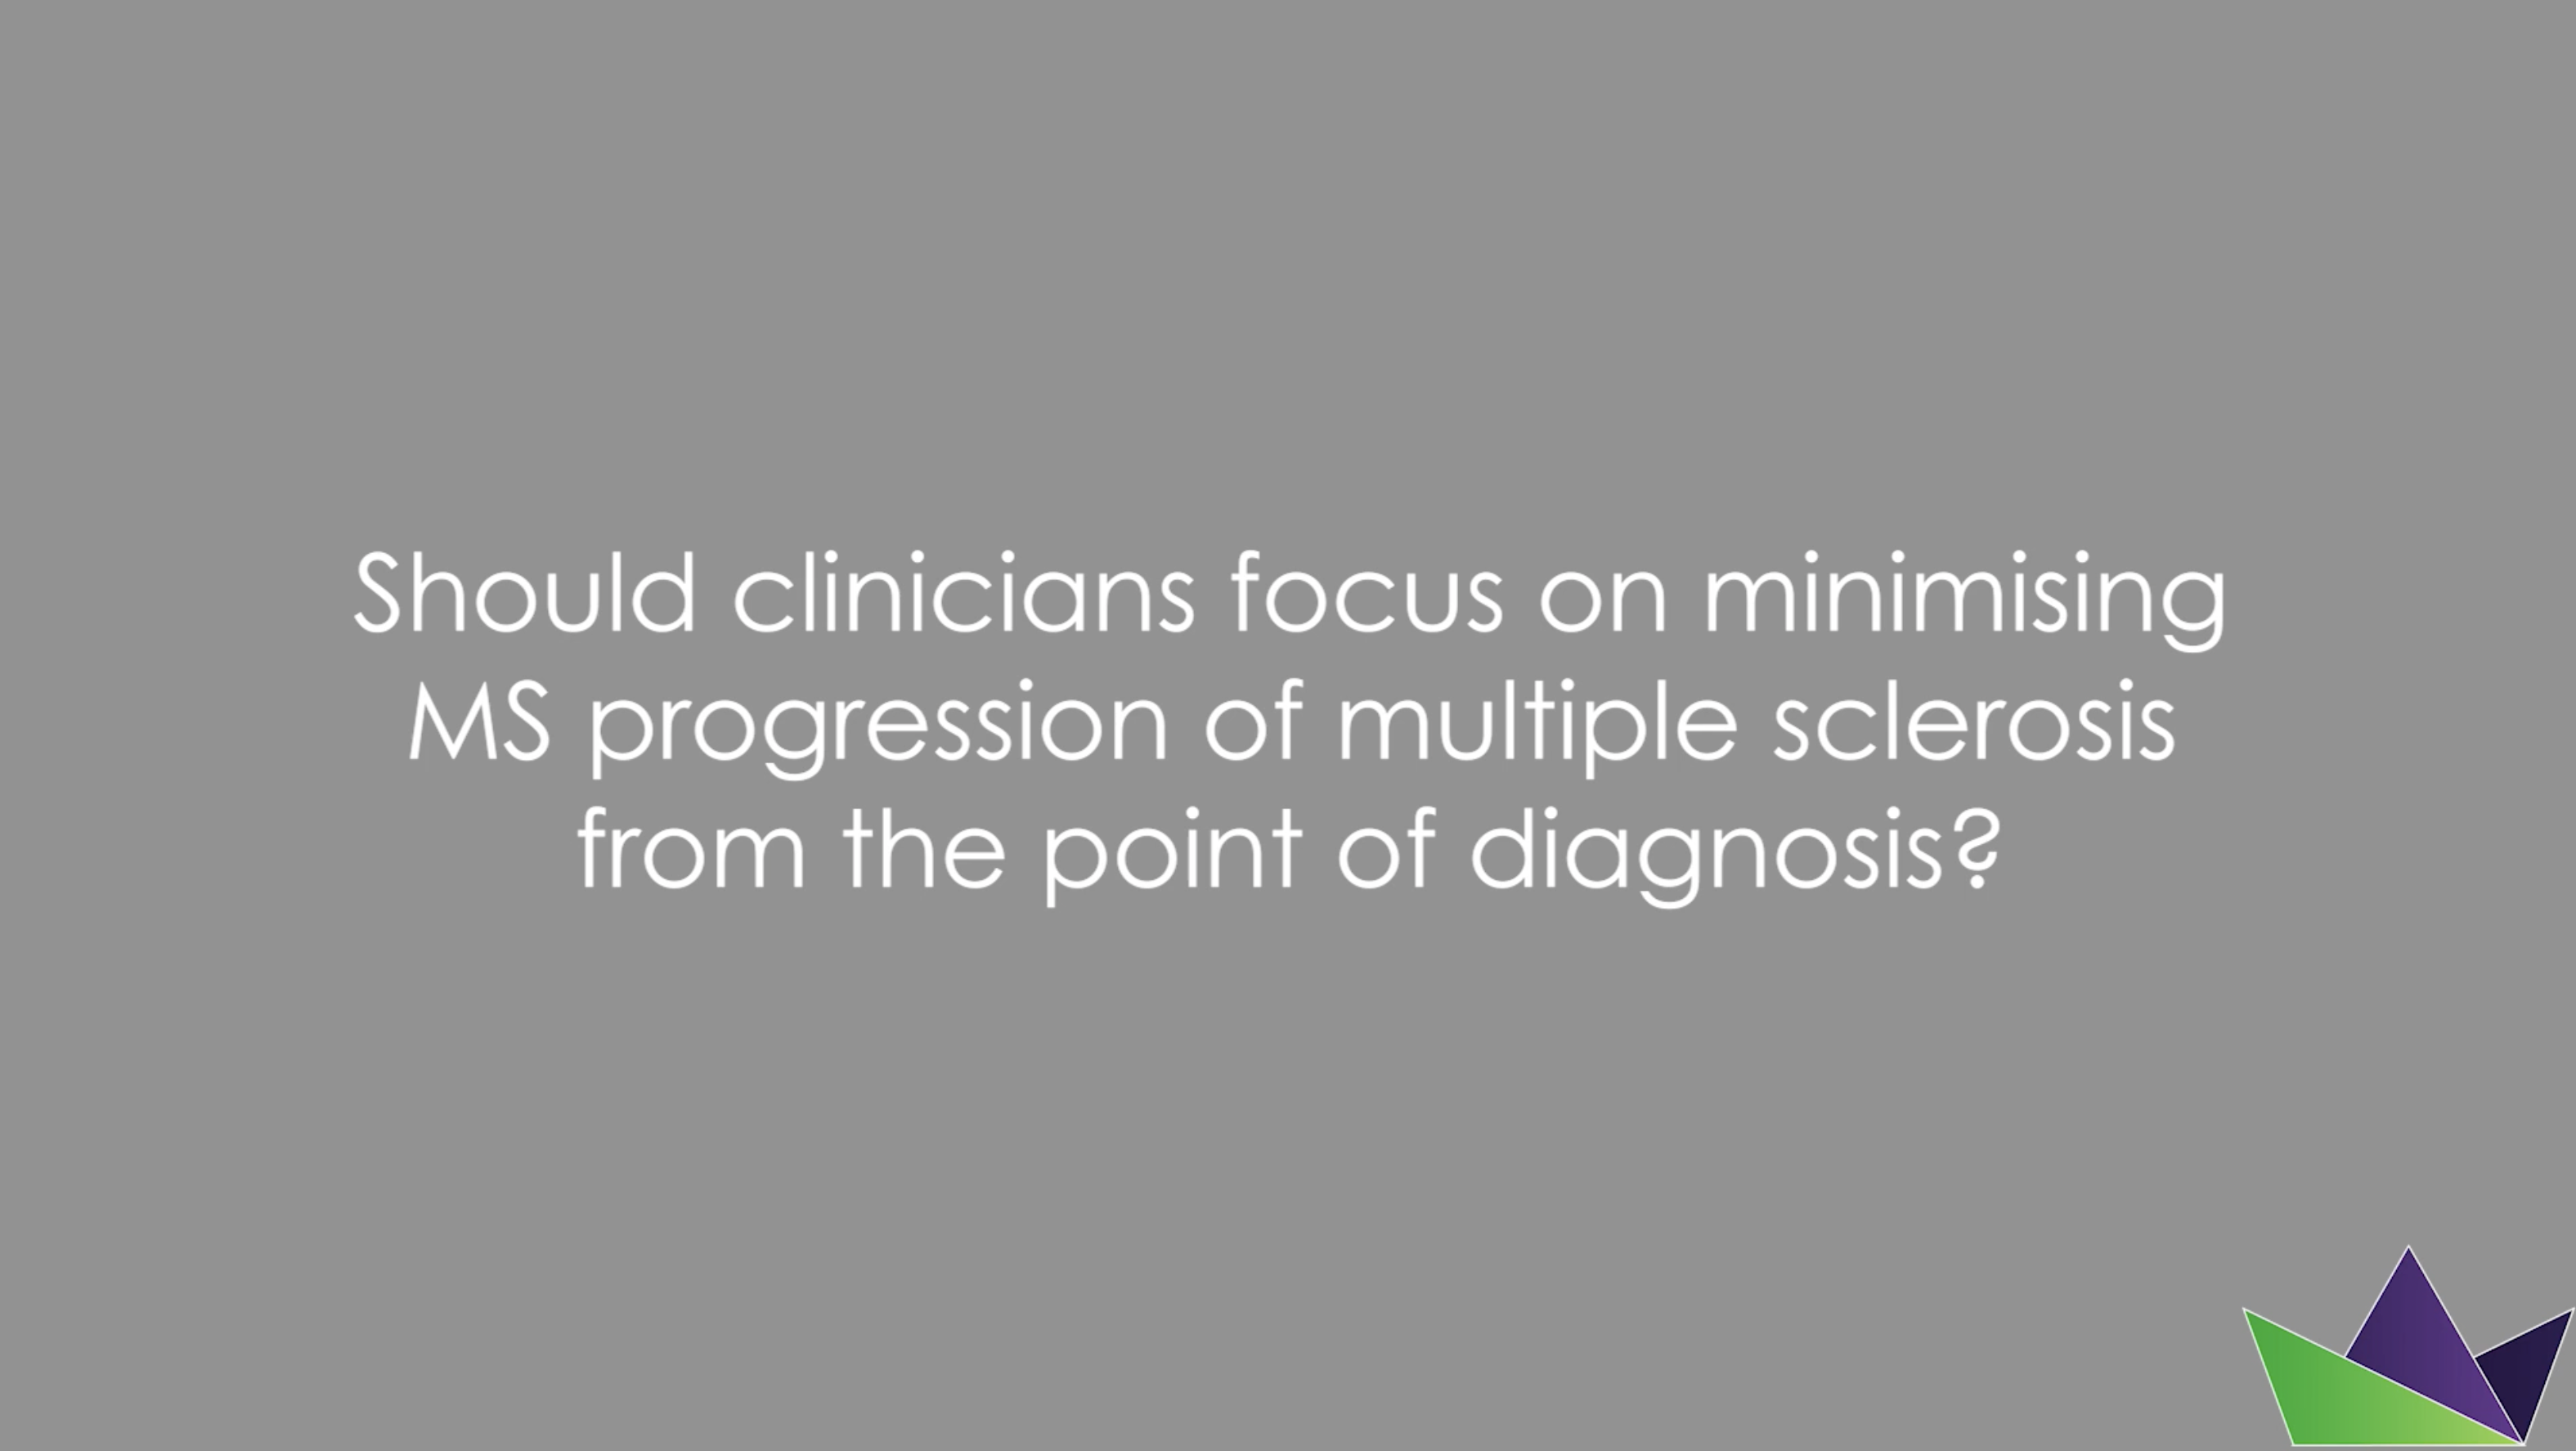 Should clinicians focus on minimising disease progression from the point of diagnosis